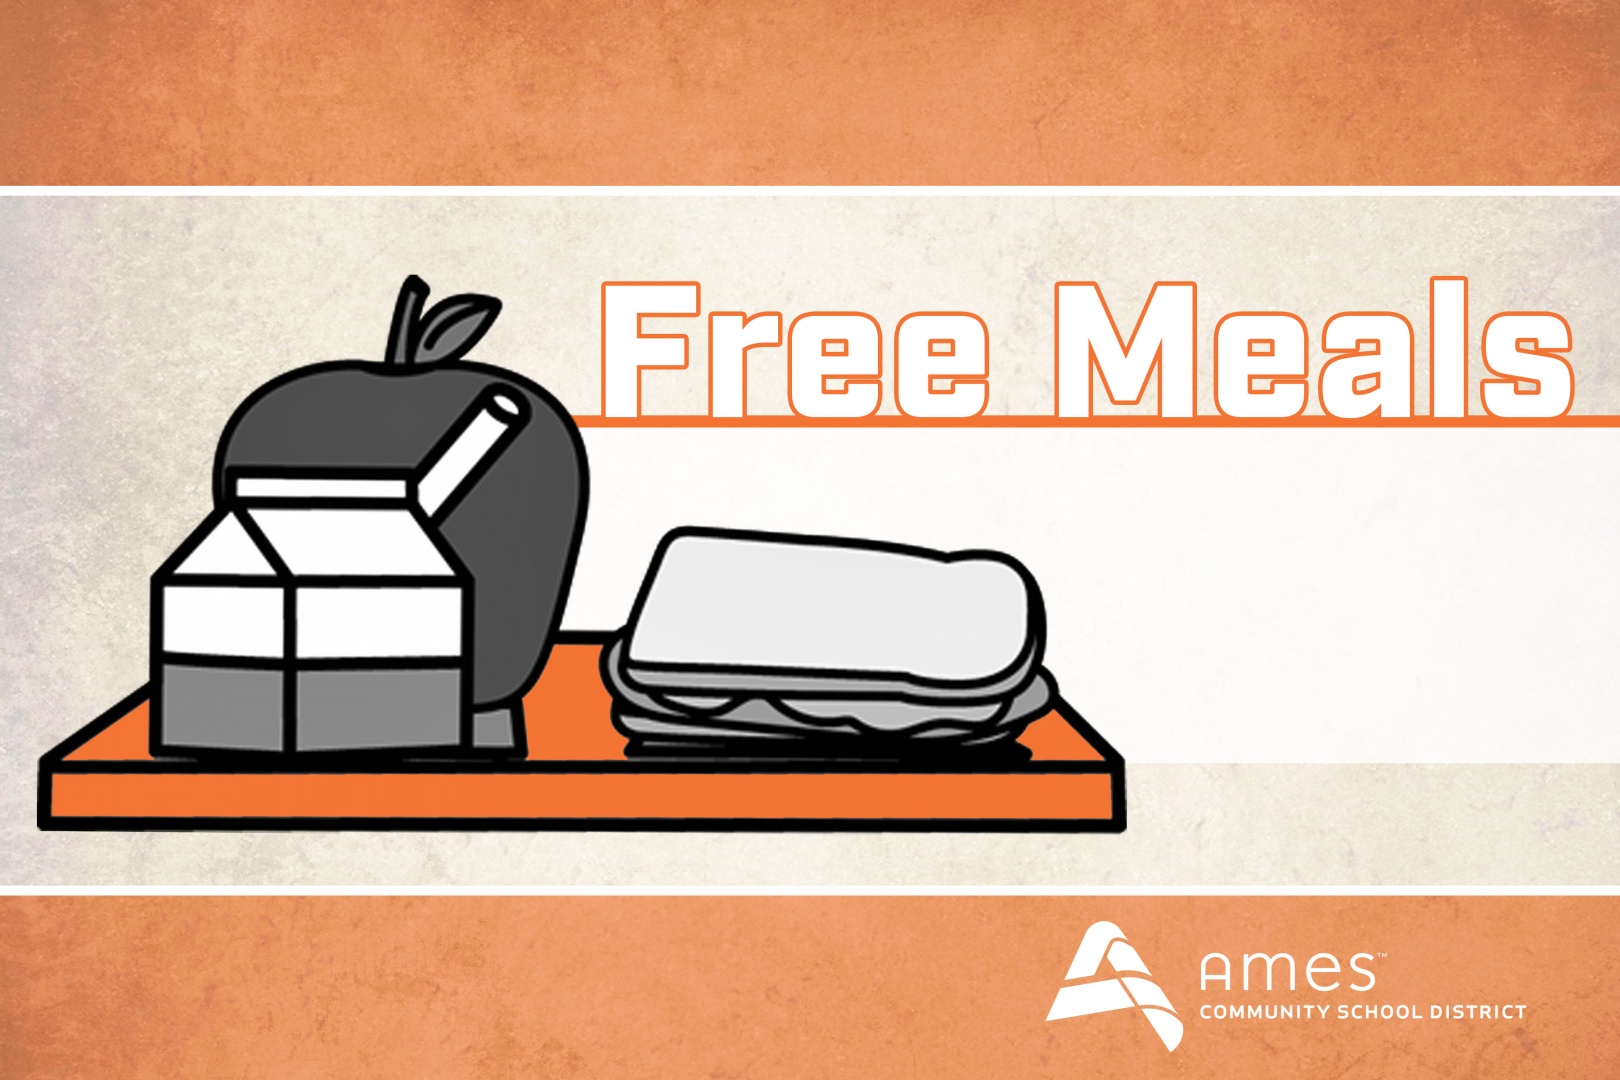 Free Meals for All Children at Ames Schools Through the 20-21 School Year